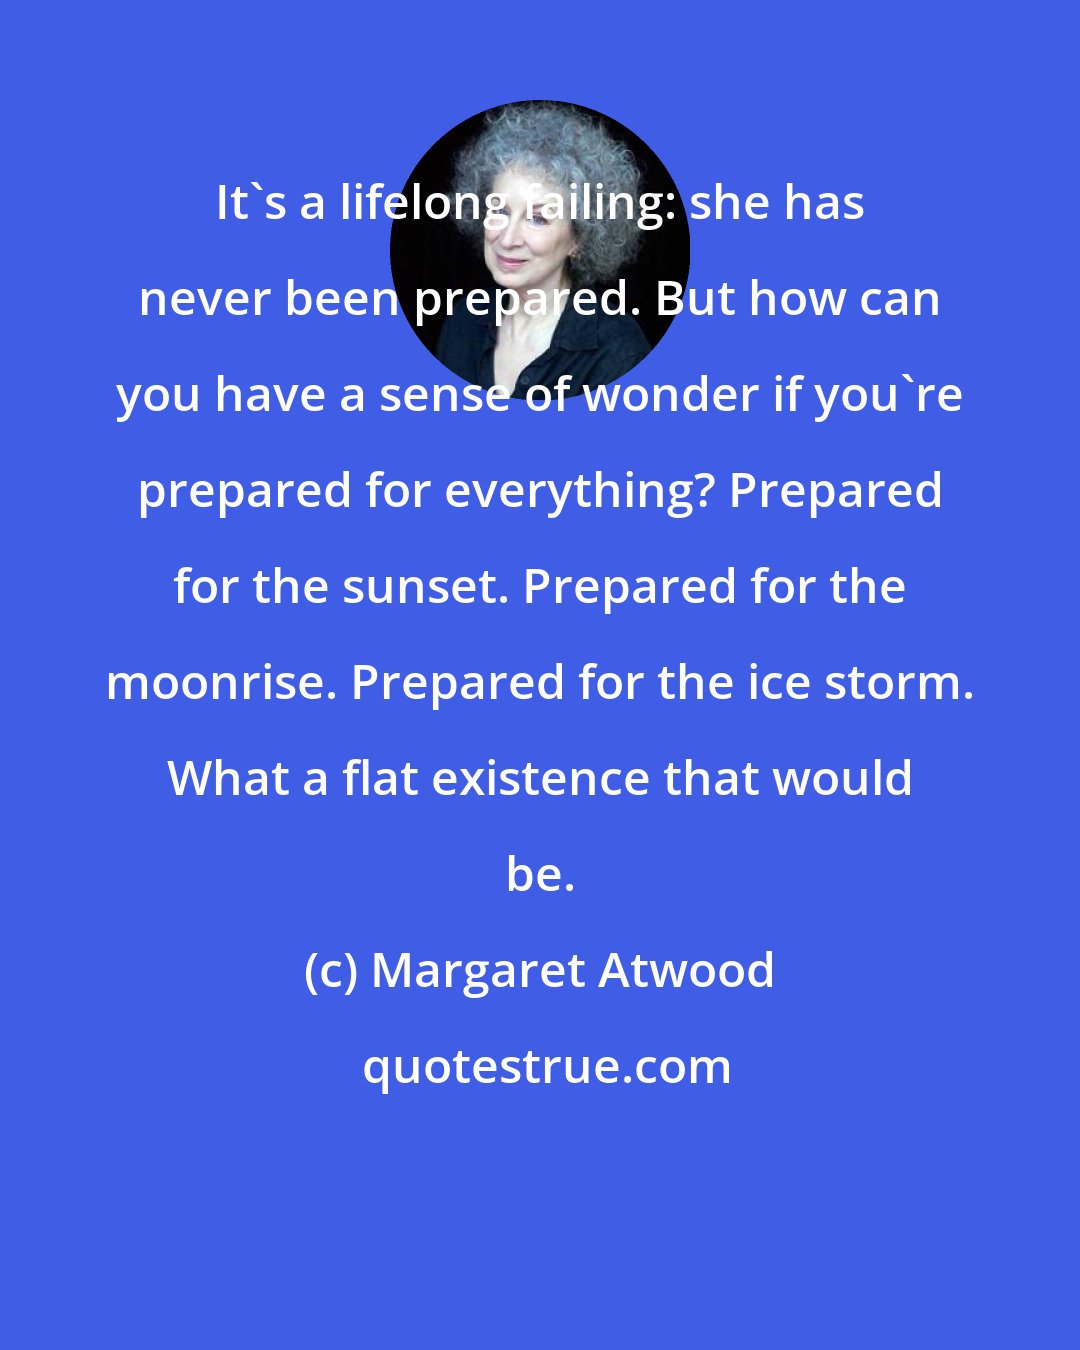 Margaret Atwood: It's a lifelong failing: she has never been prepared. But how can you have a sense of wonder if you're prepared for everything? Prepared for the sunset. Prepared for the moonrise. Prepared for the ice storm. What a flat existence that would be.